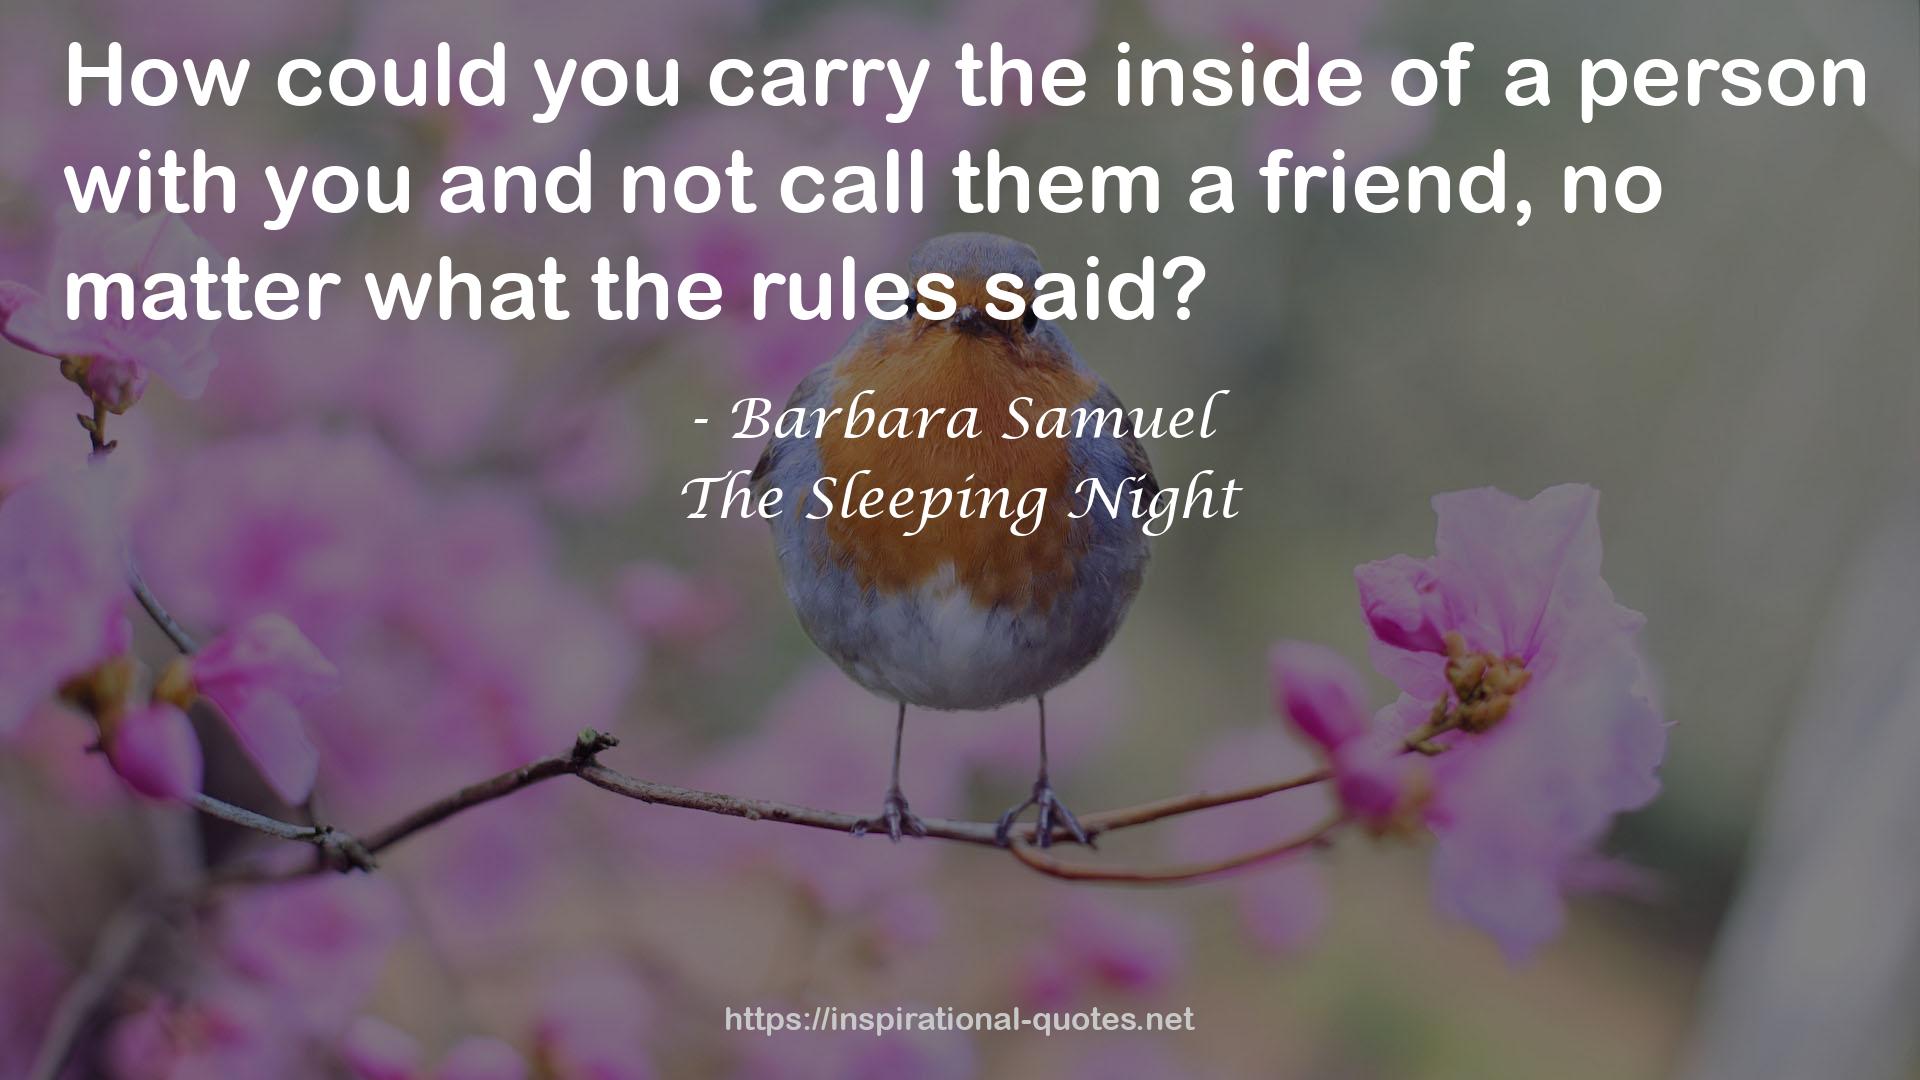 The Sleeping Night QUOTES